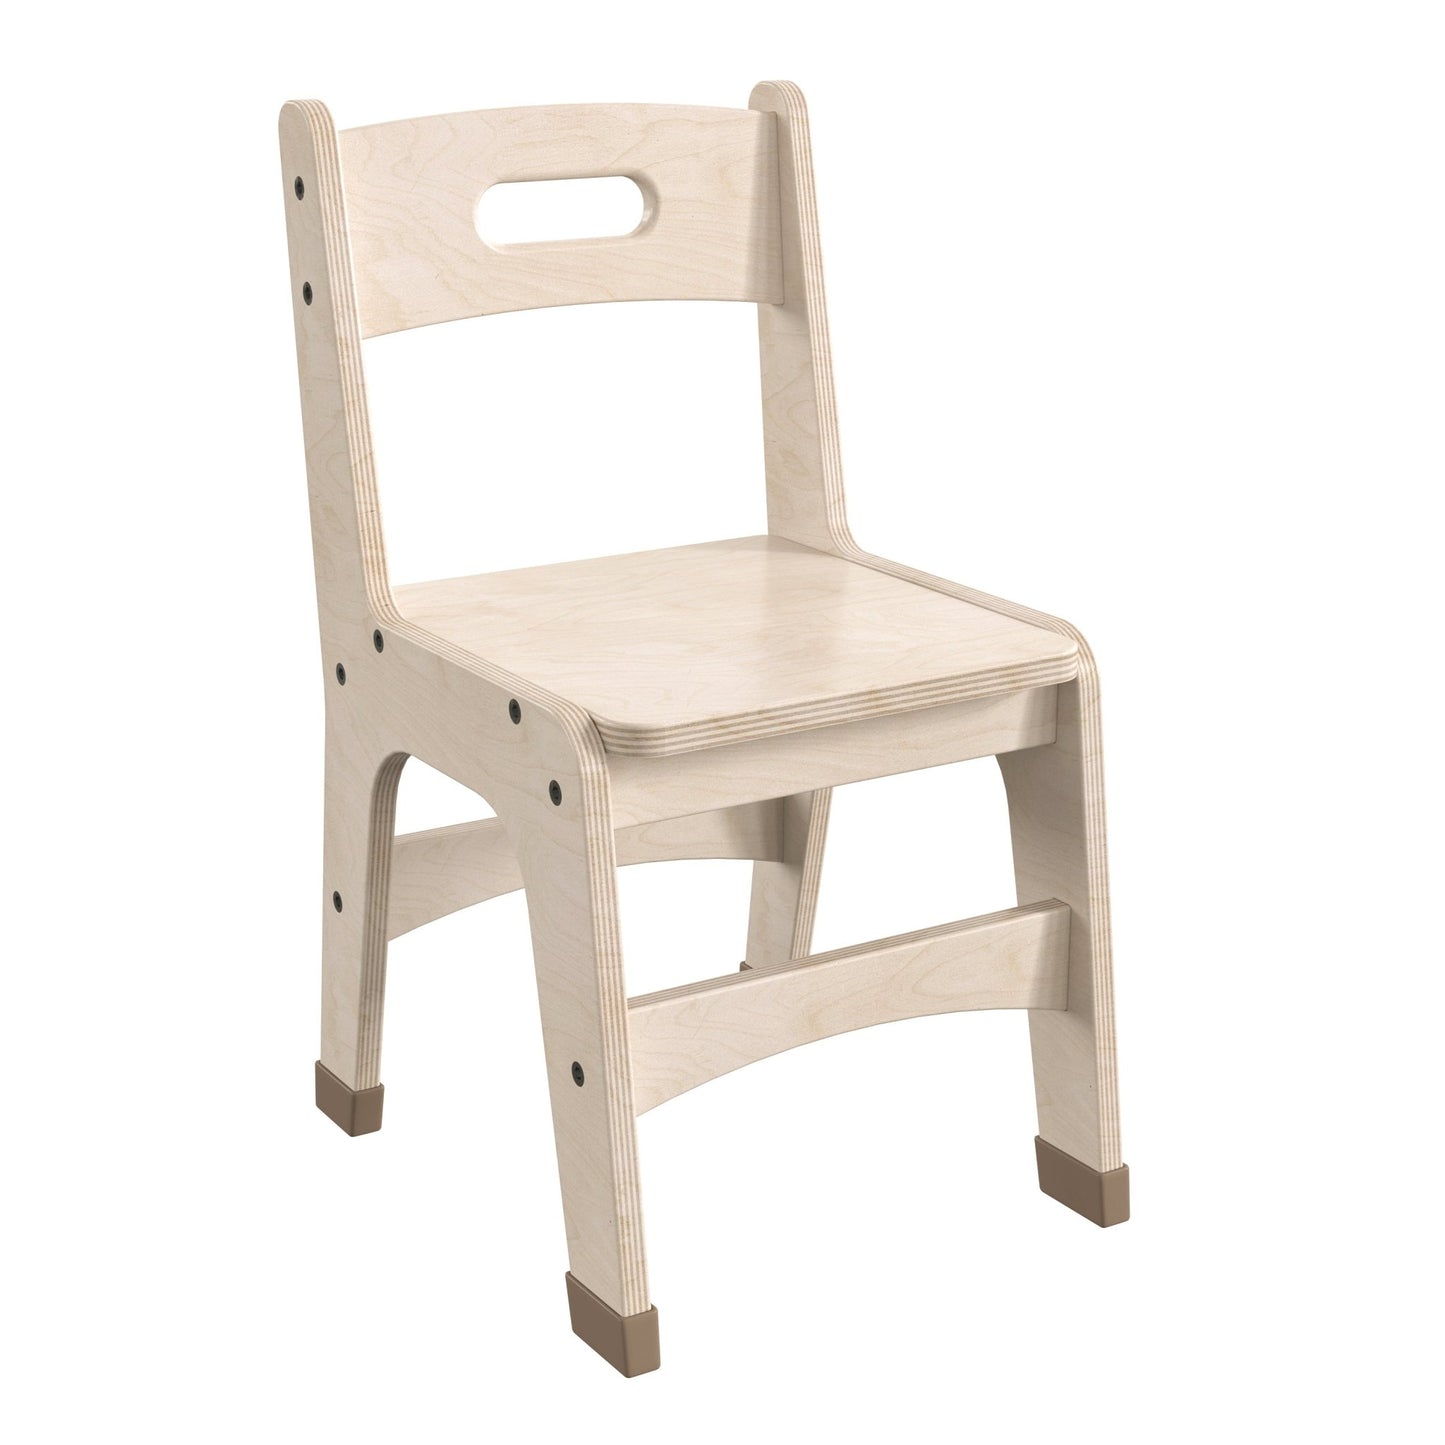 Bright Beginnings Set of 2 Commercial Grade Wooden Classroom Chairs, 11.5" Seat Height with Non-Slip Foot Caps and Built-In Carrying Handle, Natural - SchoolOutlet